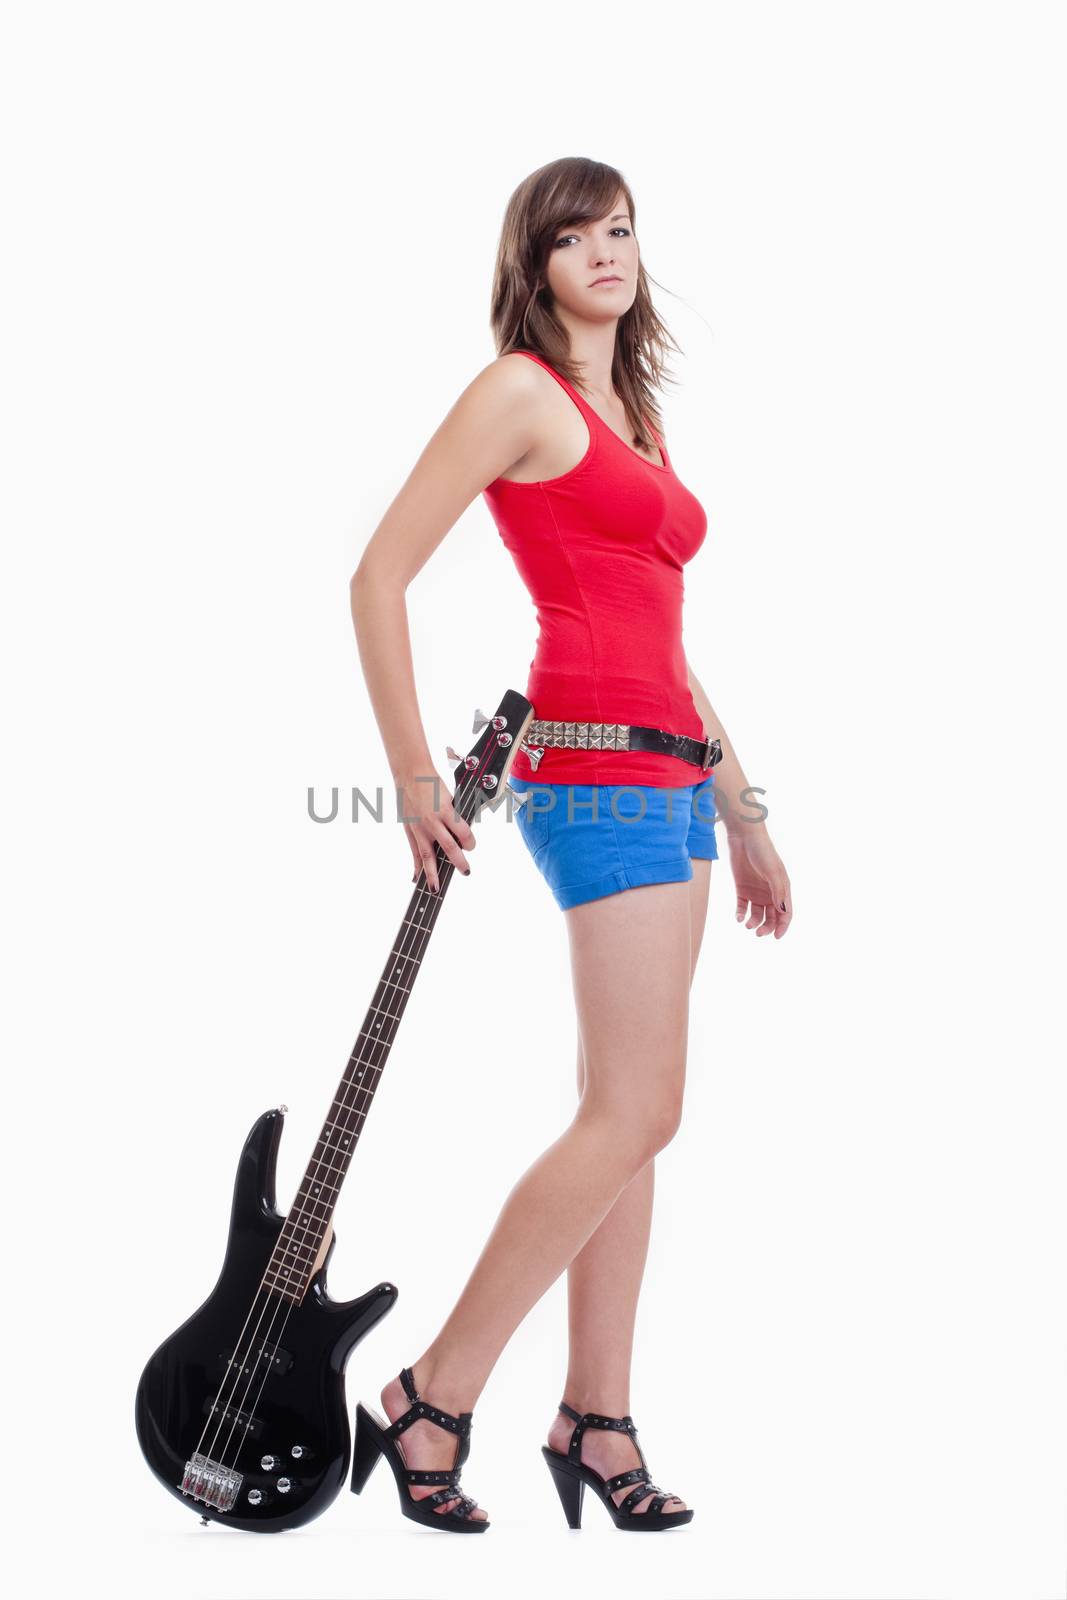 young female bass guitar player in red top - isolated on white